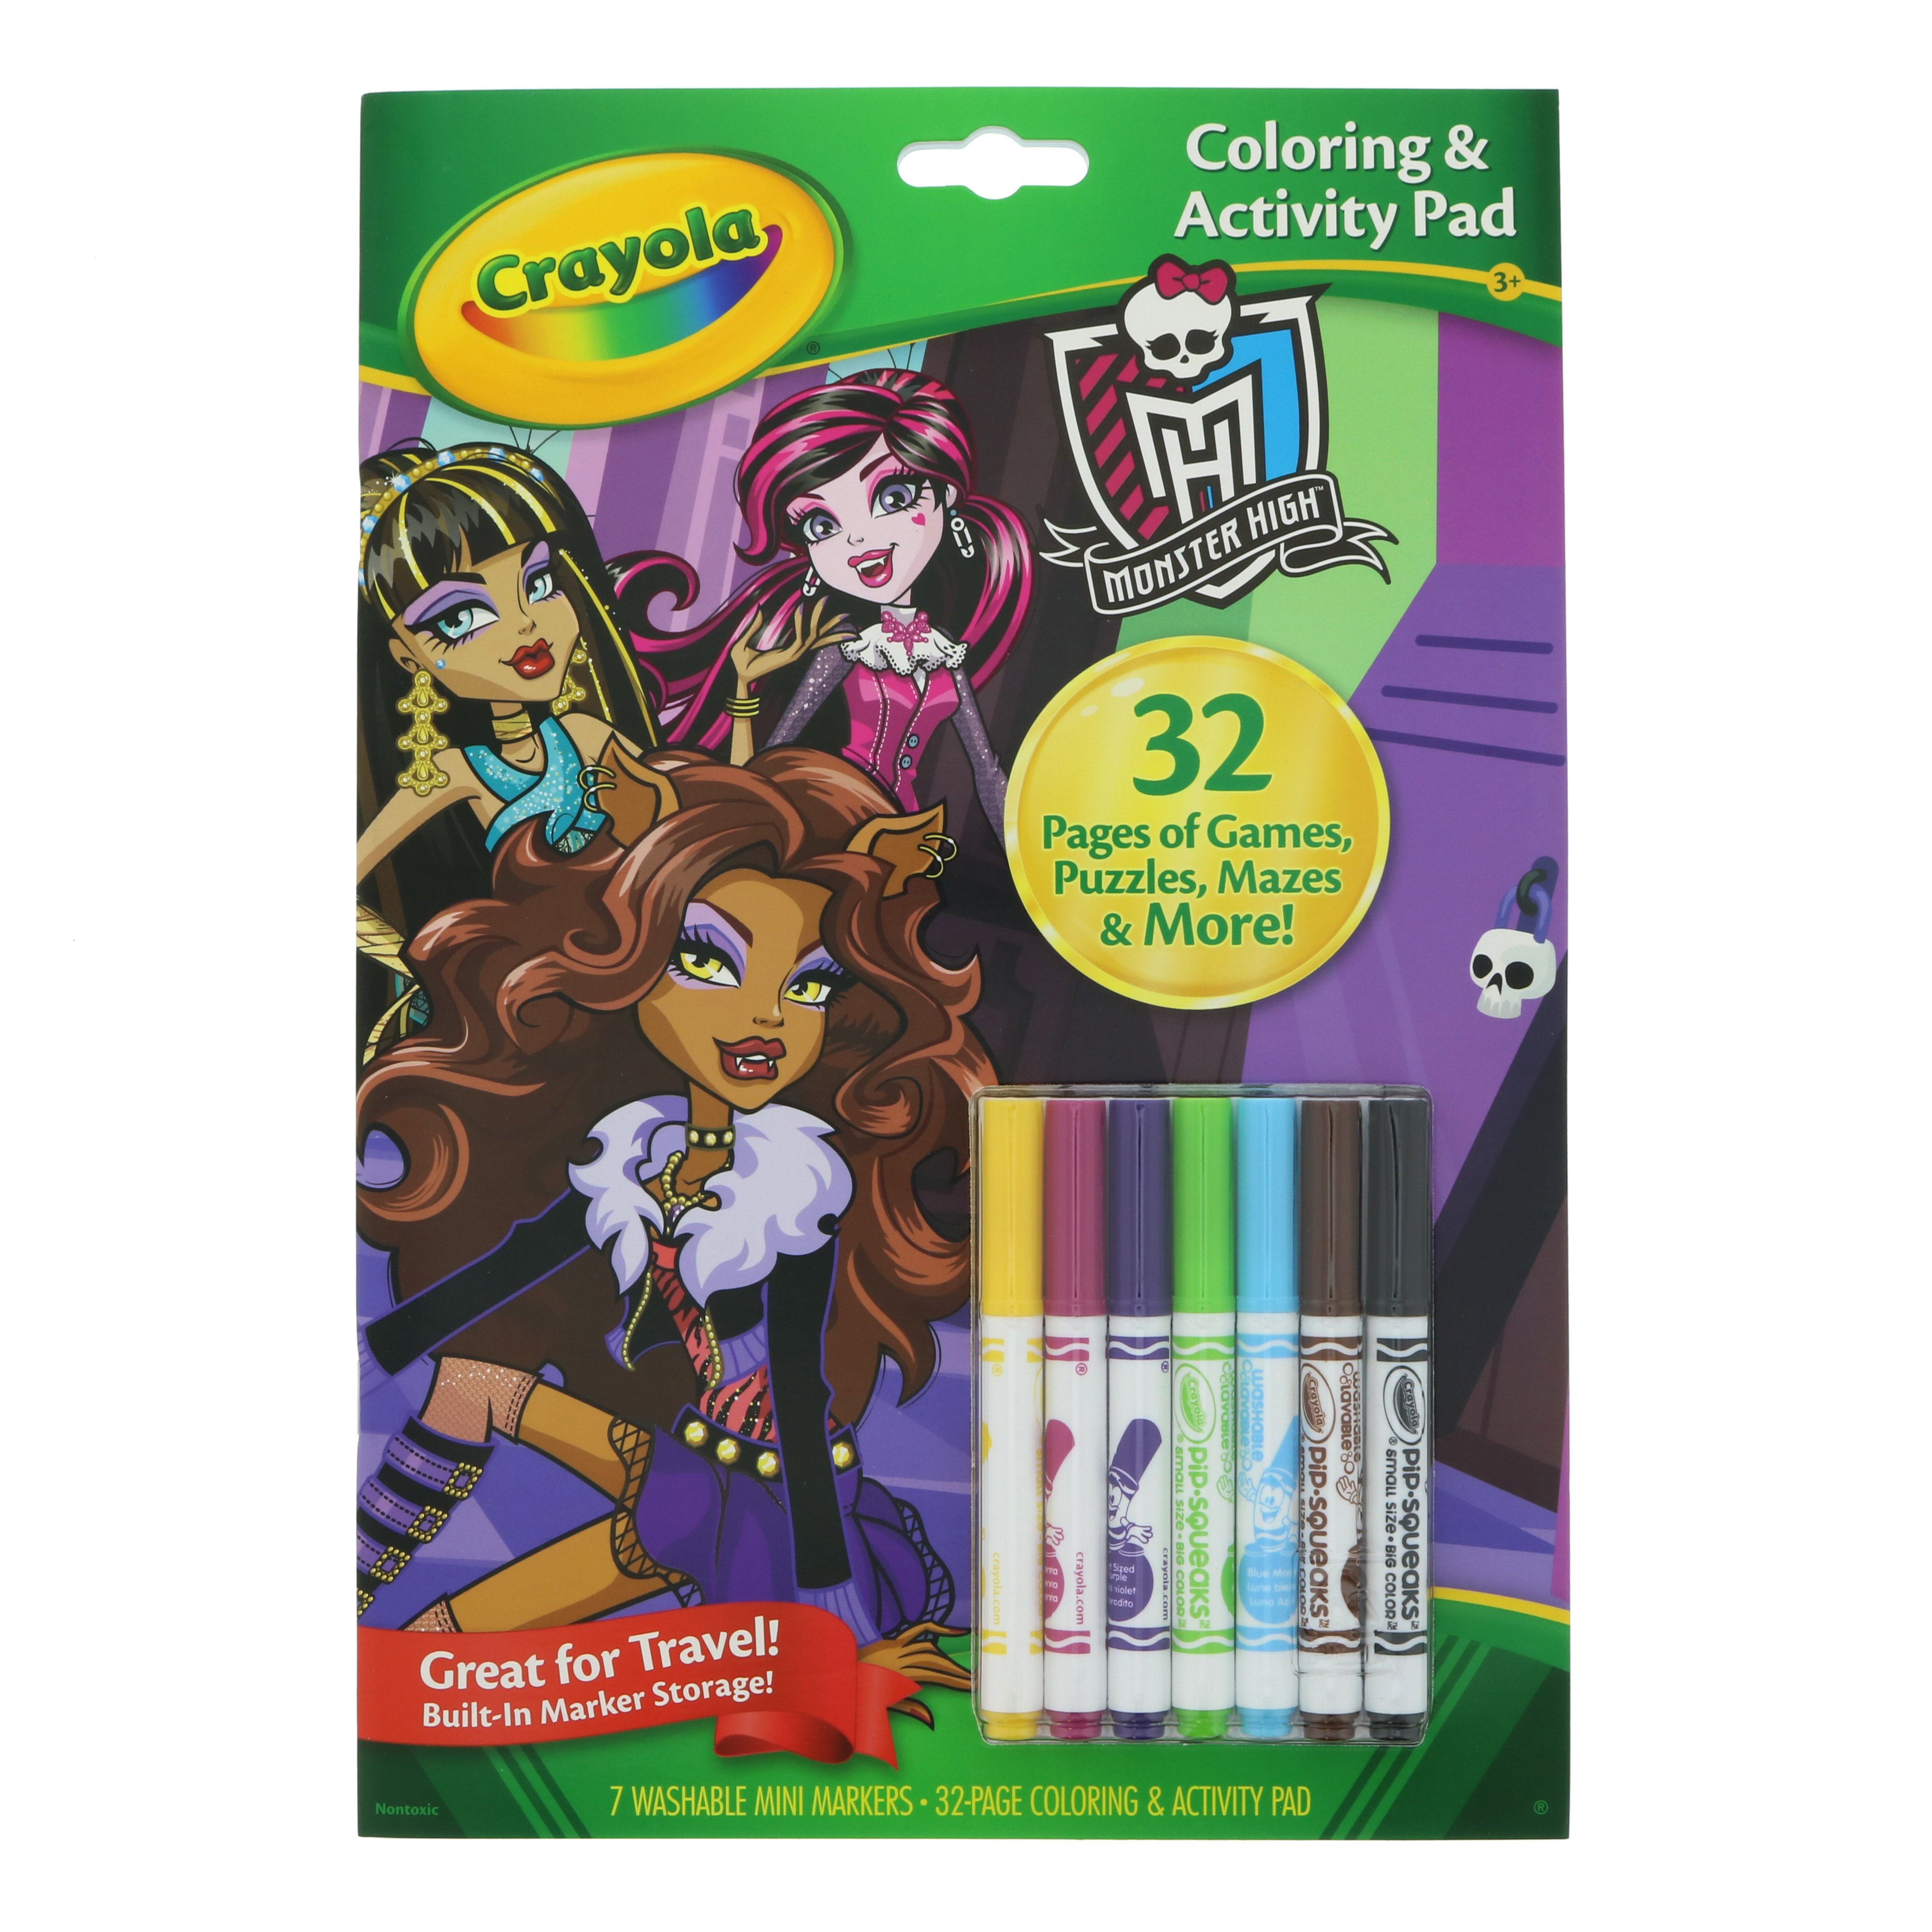 HP Coloring Books, Wiki